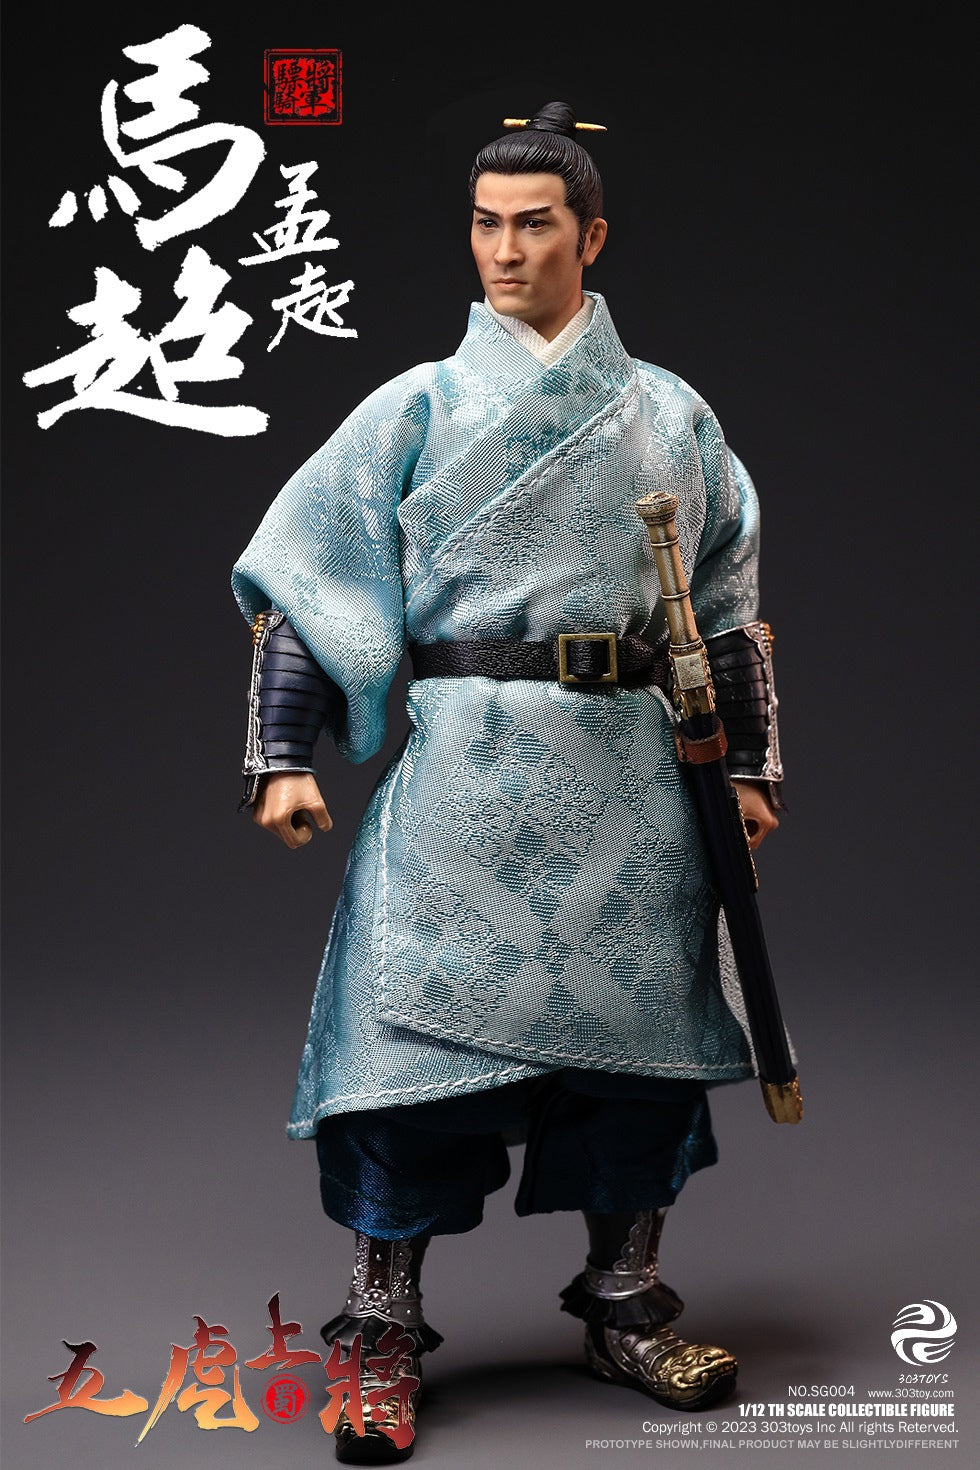 303 Toys - SG004 - Three Kingdoms on Palm Series - The Five Tiger Generals 五虎上將 - Ma Chao (Meng Qi) 馬超 (孟起) -驃騎將軍- (Deluxe Ver.) (1/12 Scale) - Marvelous Toys